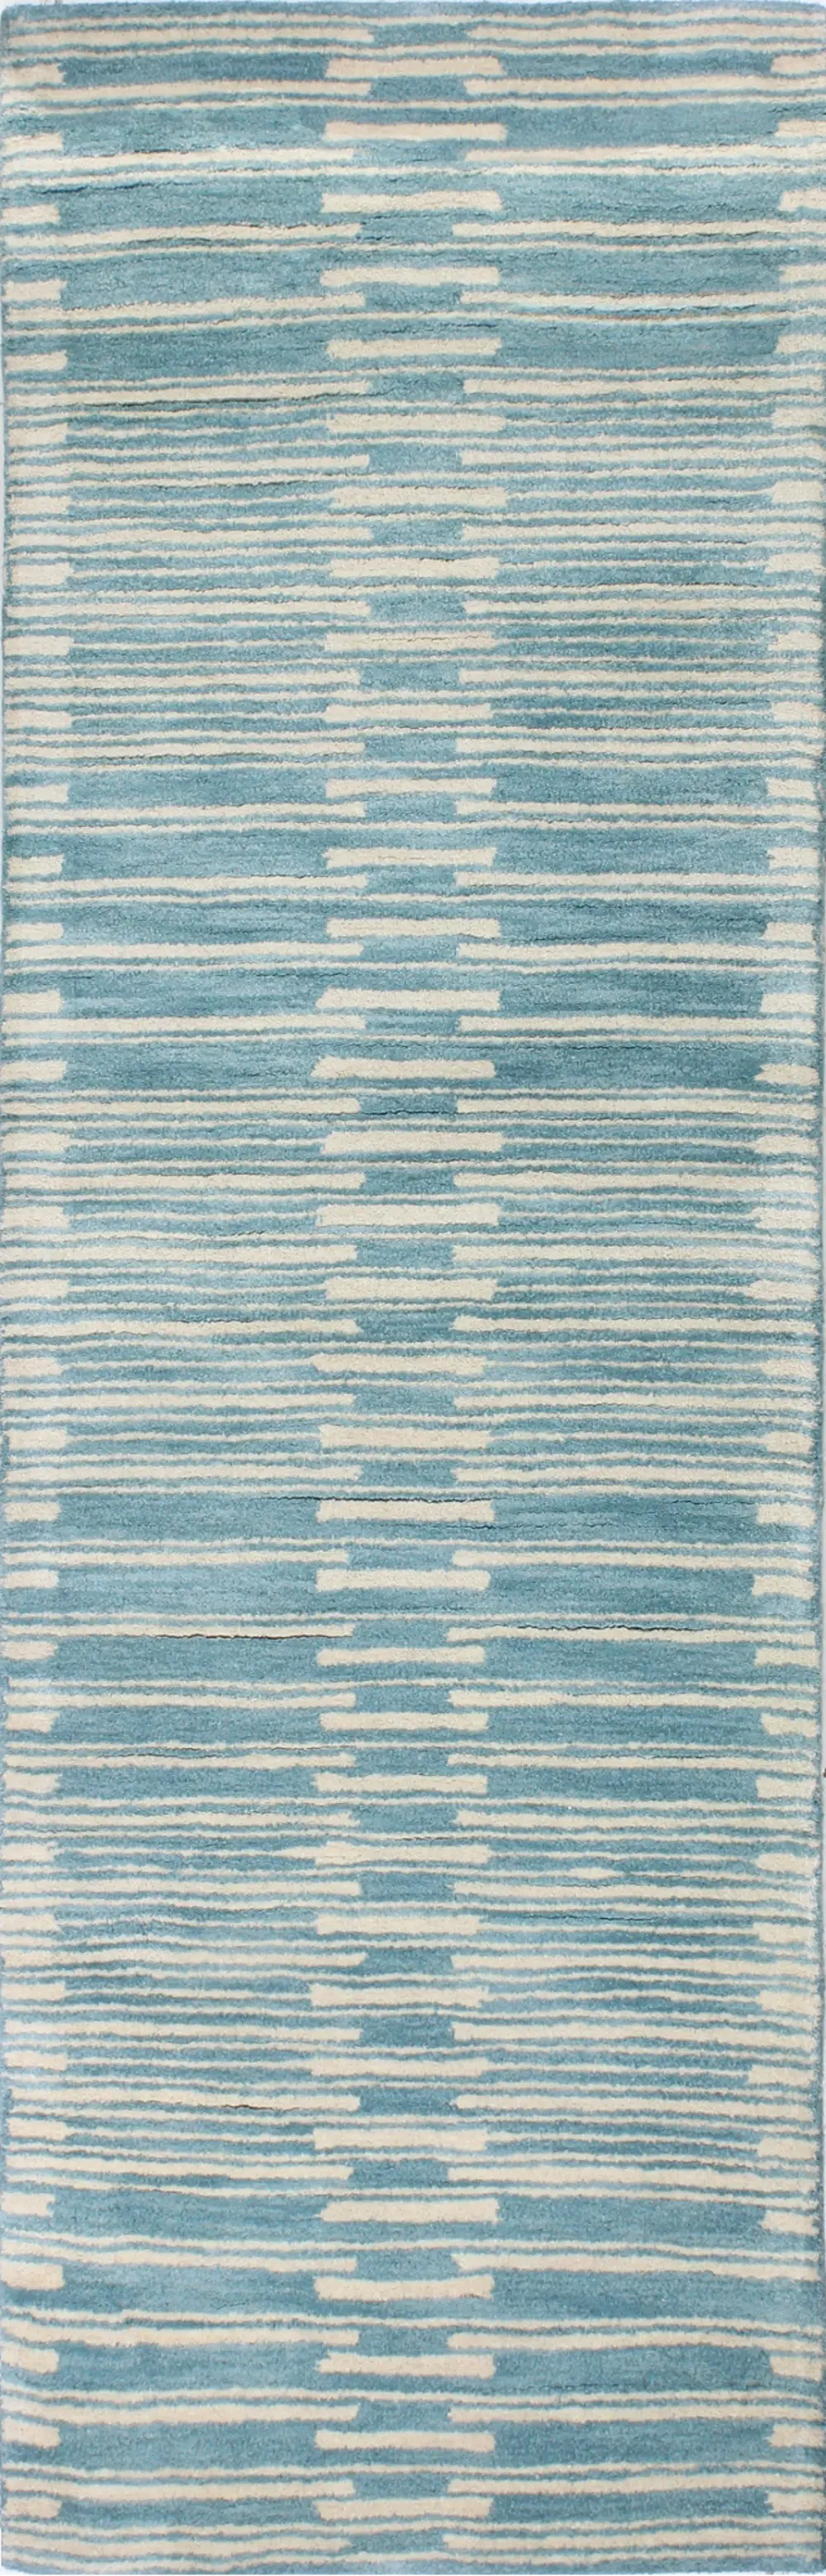 S185-BL-2.6X8-ST264 Contemporary Princeton Blue 8 Foot Runner Rug - Chelsea-1